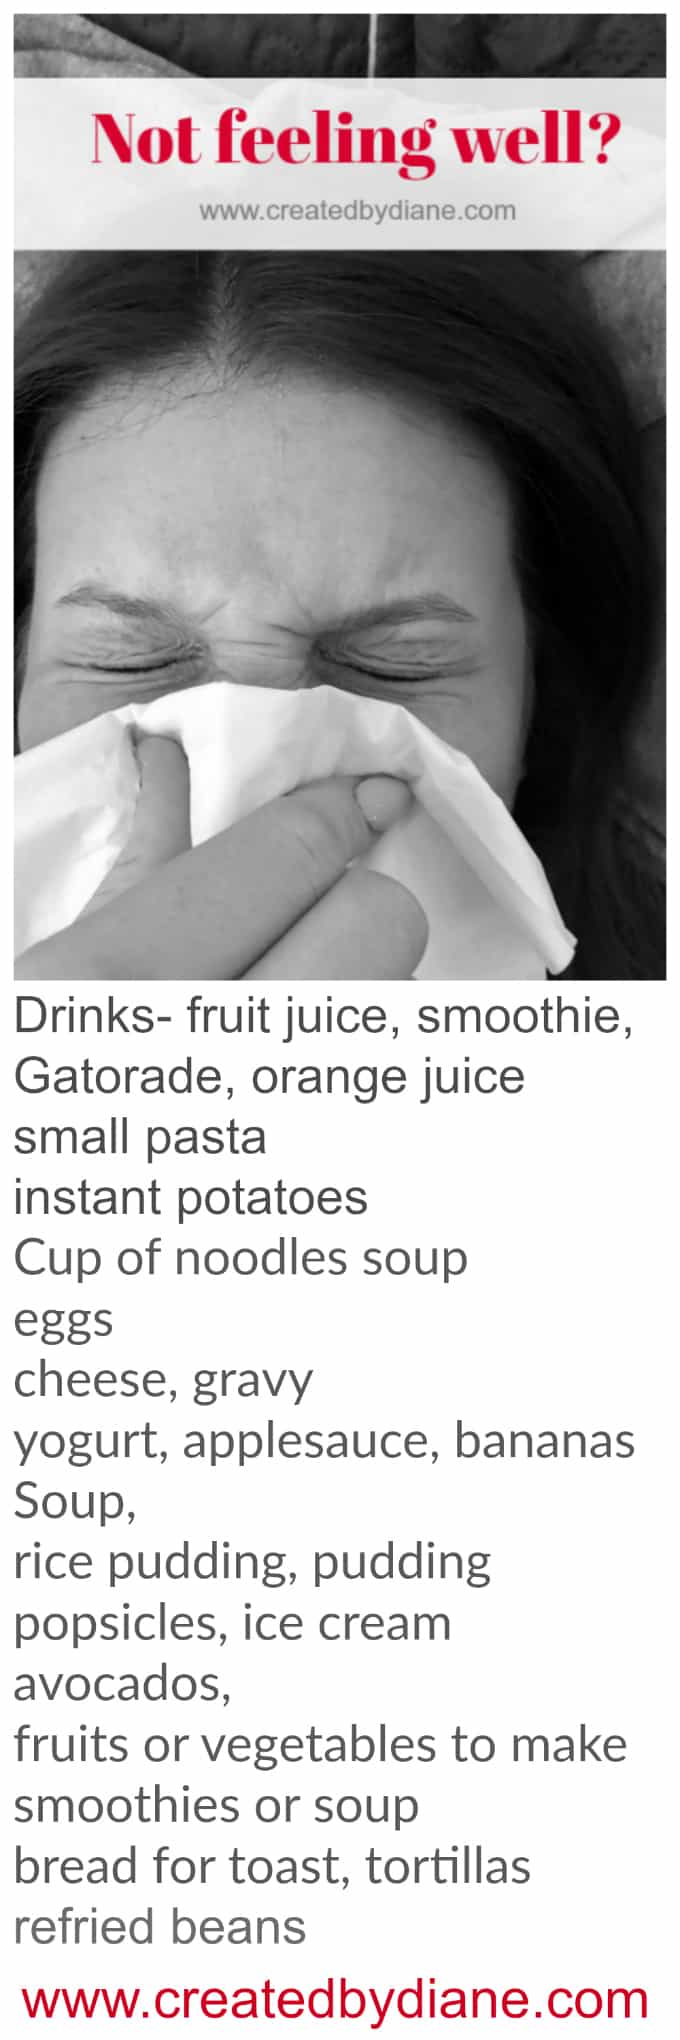 cold and flu Foods | Created by Diane